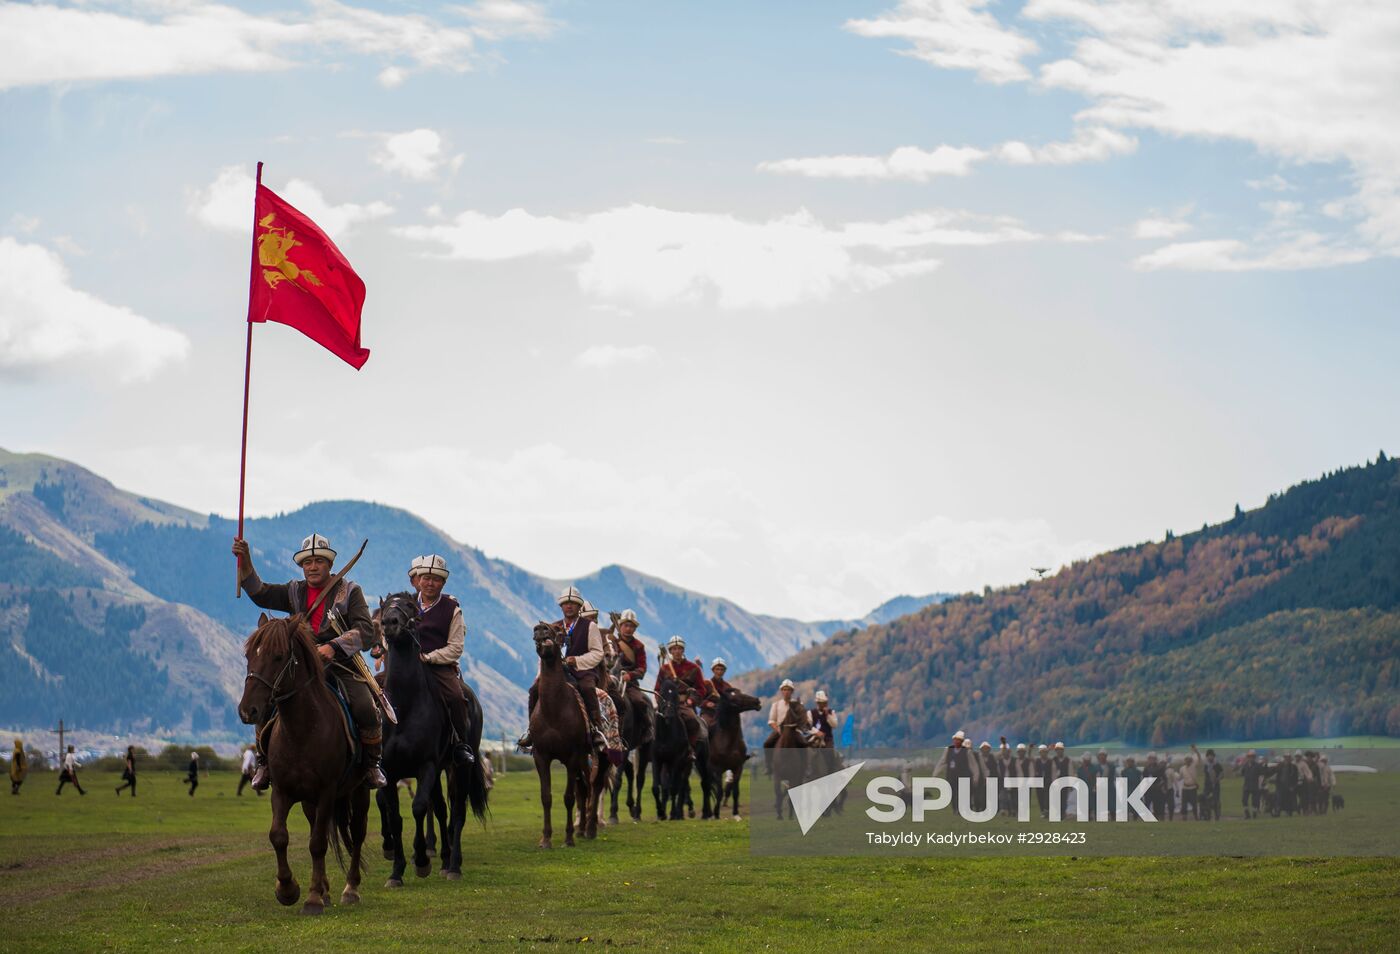 2016 World Nomad Games in Kyrgyzstan